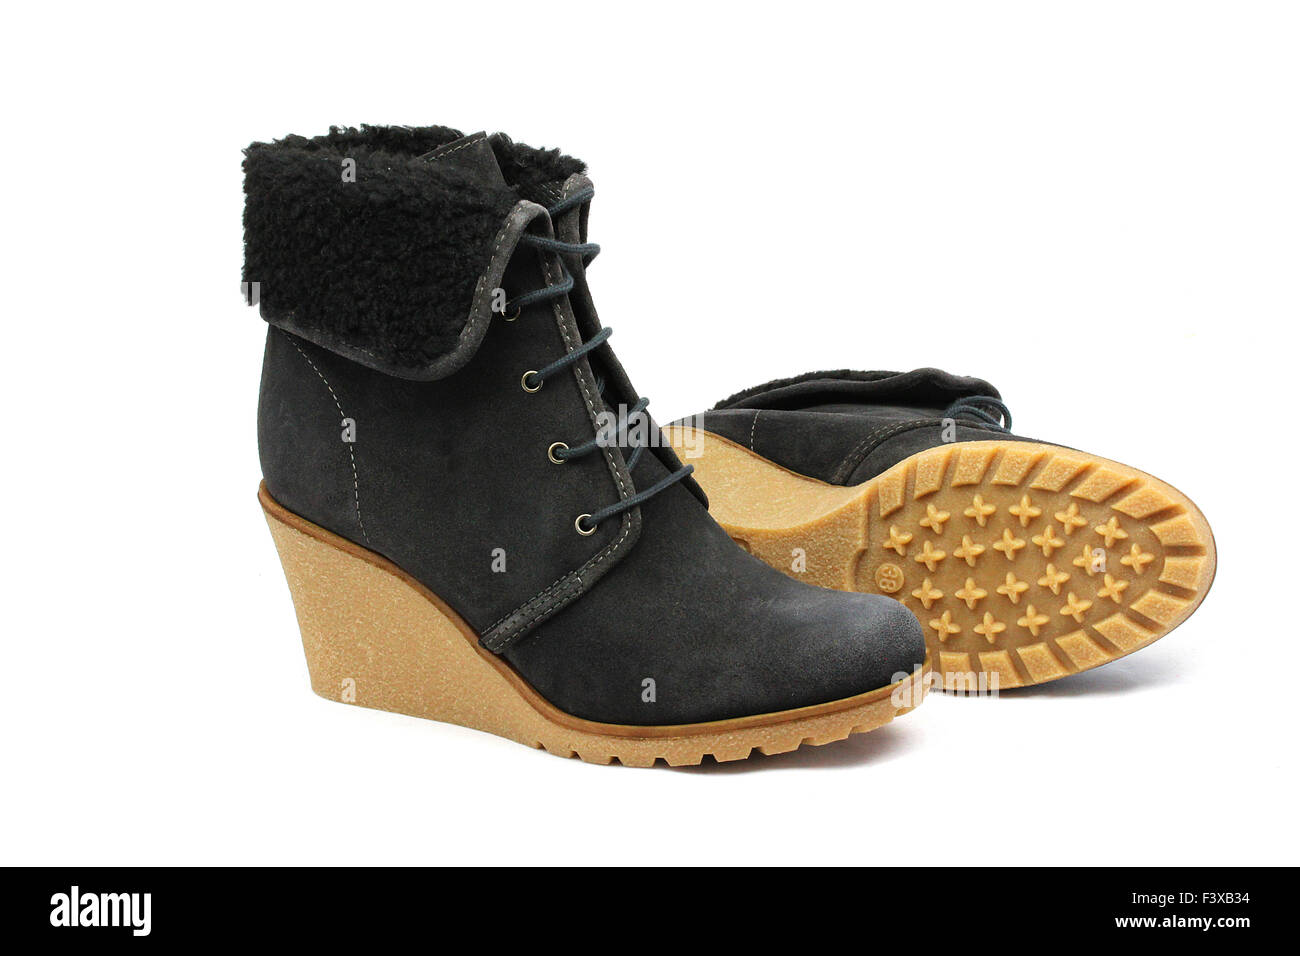 Talons wedge boot Banque D'Images